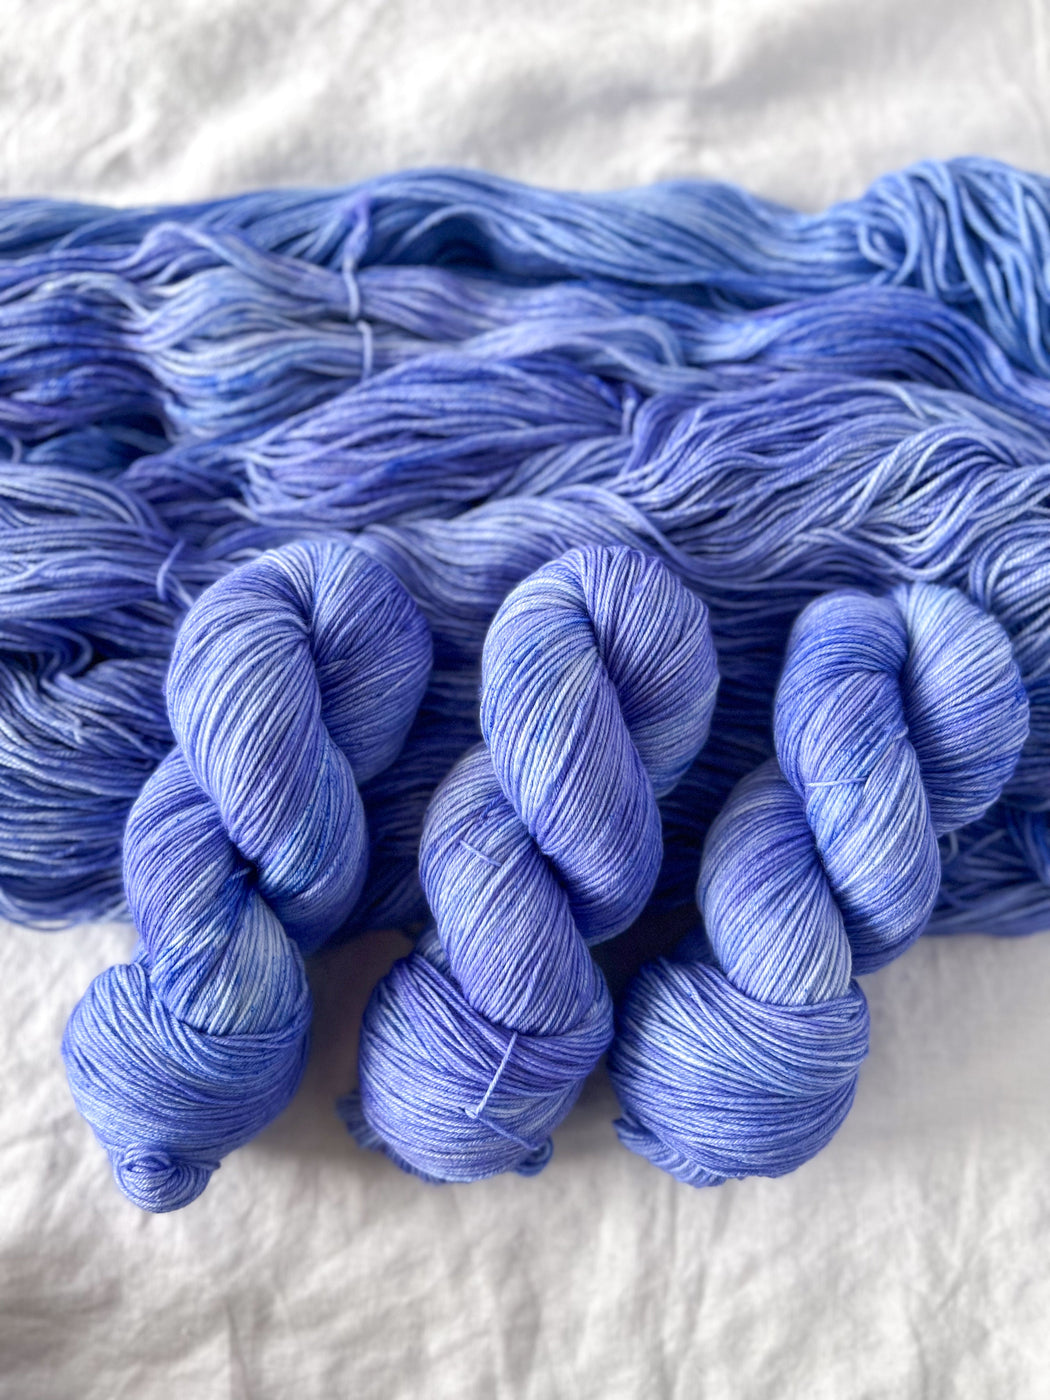 Glacier /// Pre-Order - Ruby and Roses Yarn - Hand Dyed Yarn